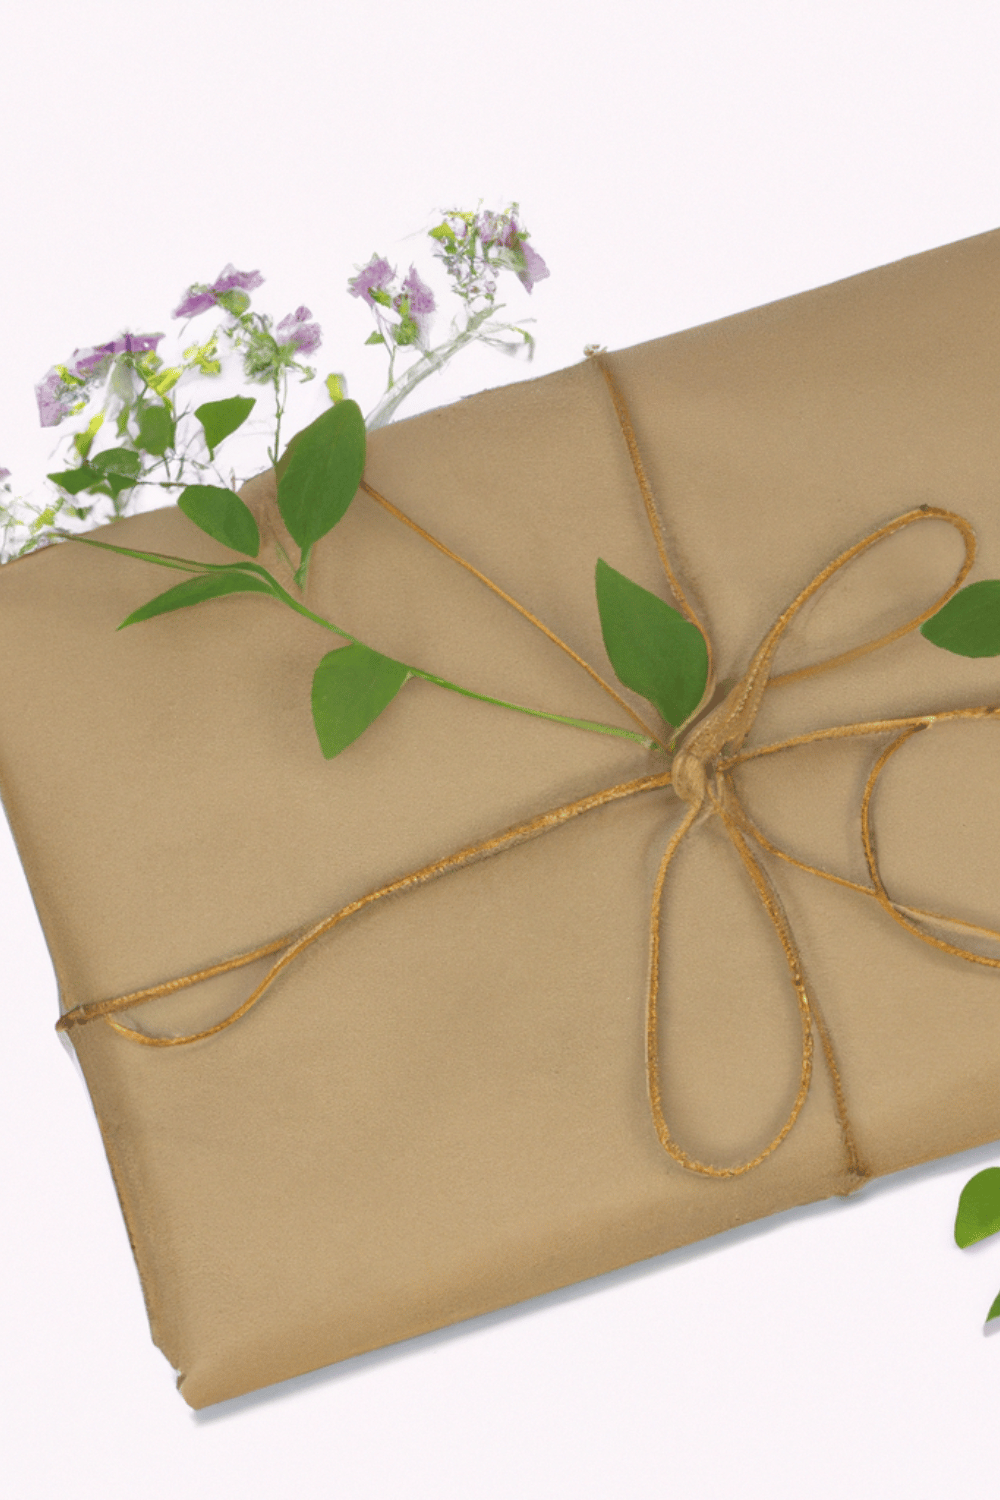 Eco Friendly Gifts: A Sustainable Guide